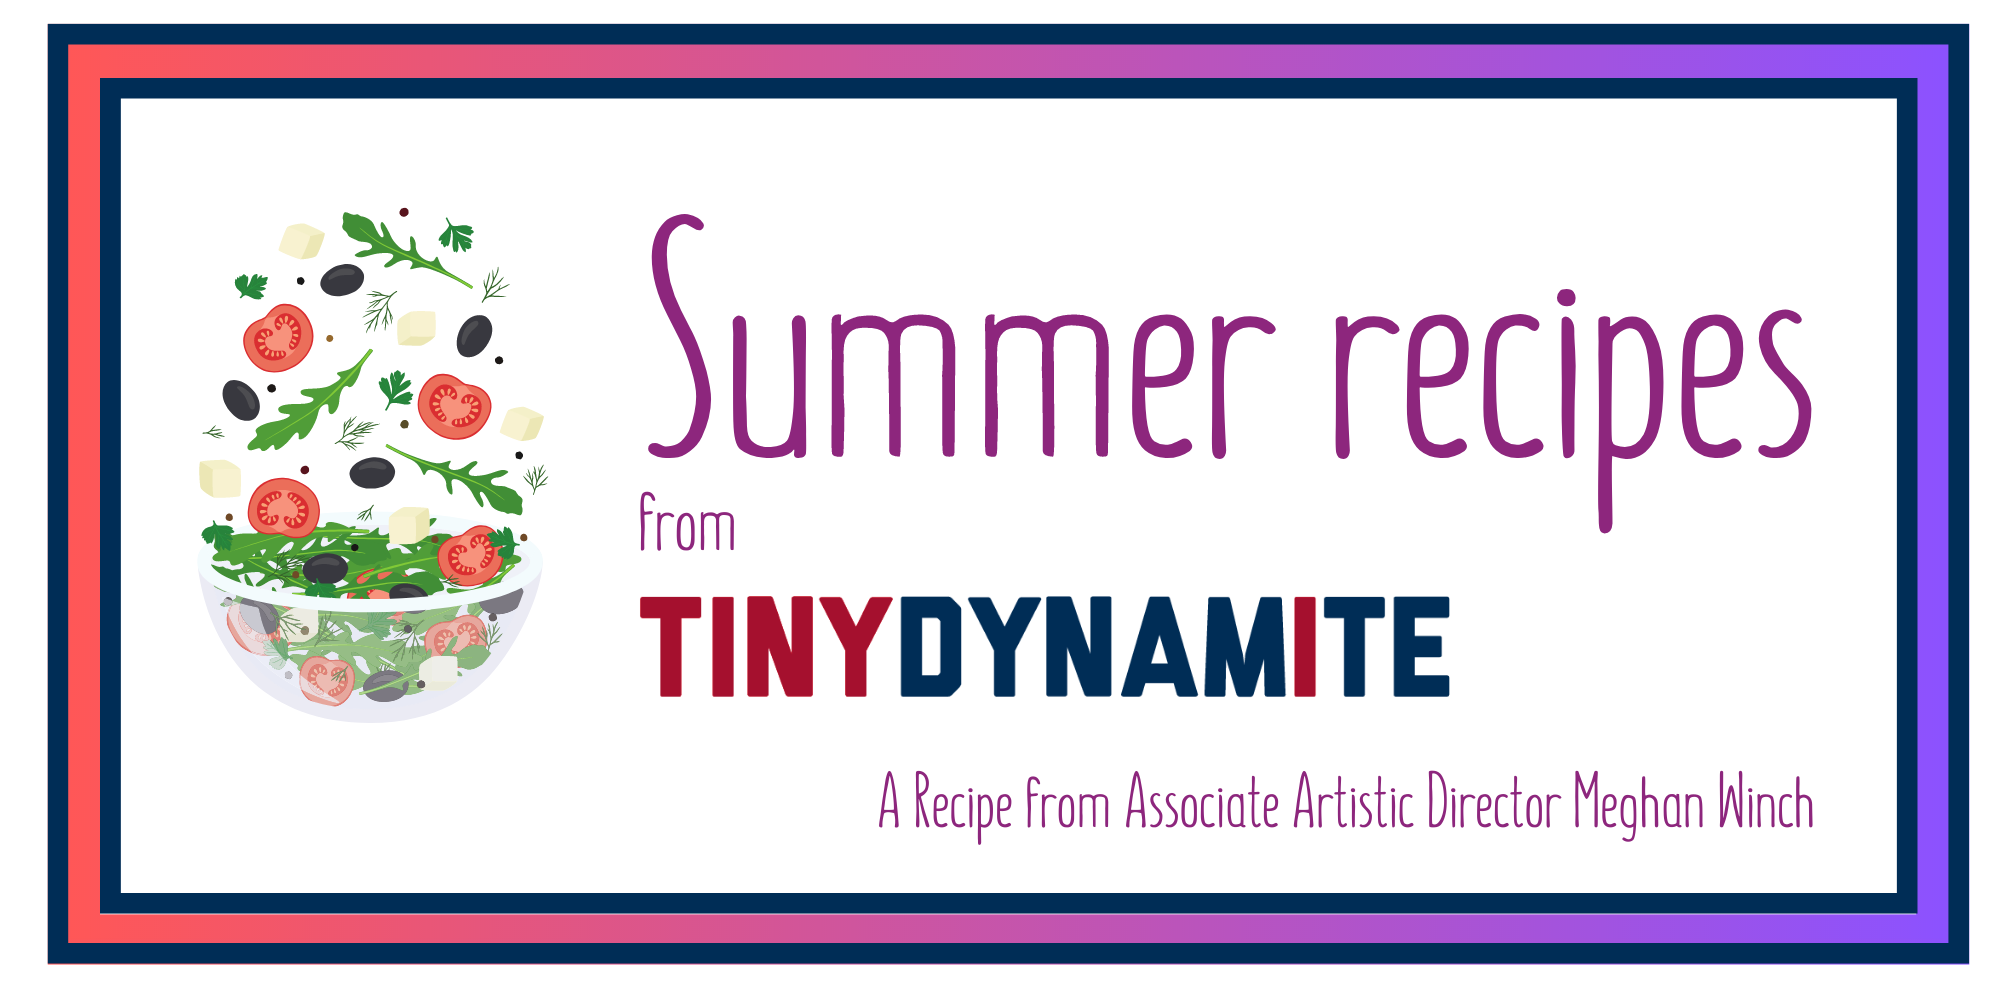 A picture of a bowl of salad and the text "Summer recipes from Tiny Dynamite; a recipe from Associate Artistic Director Meghan Winch"